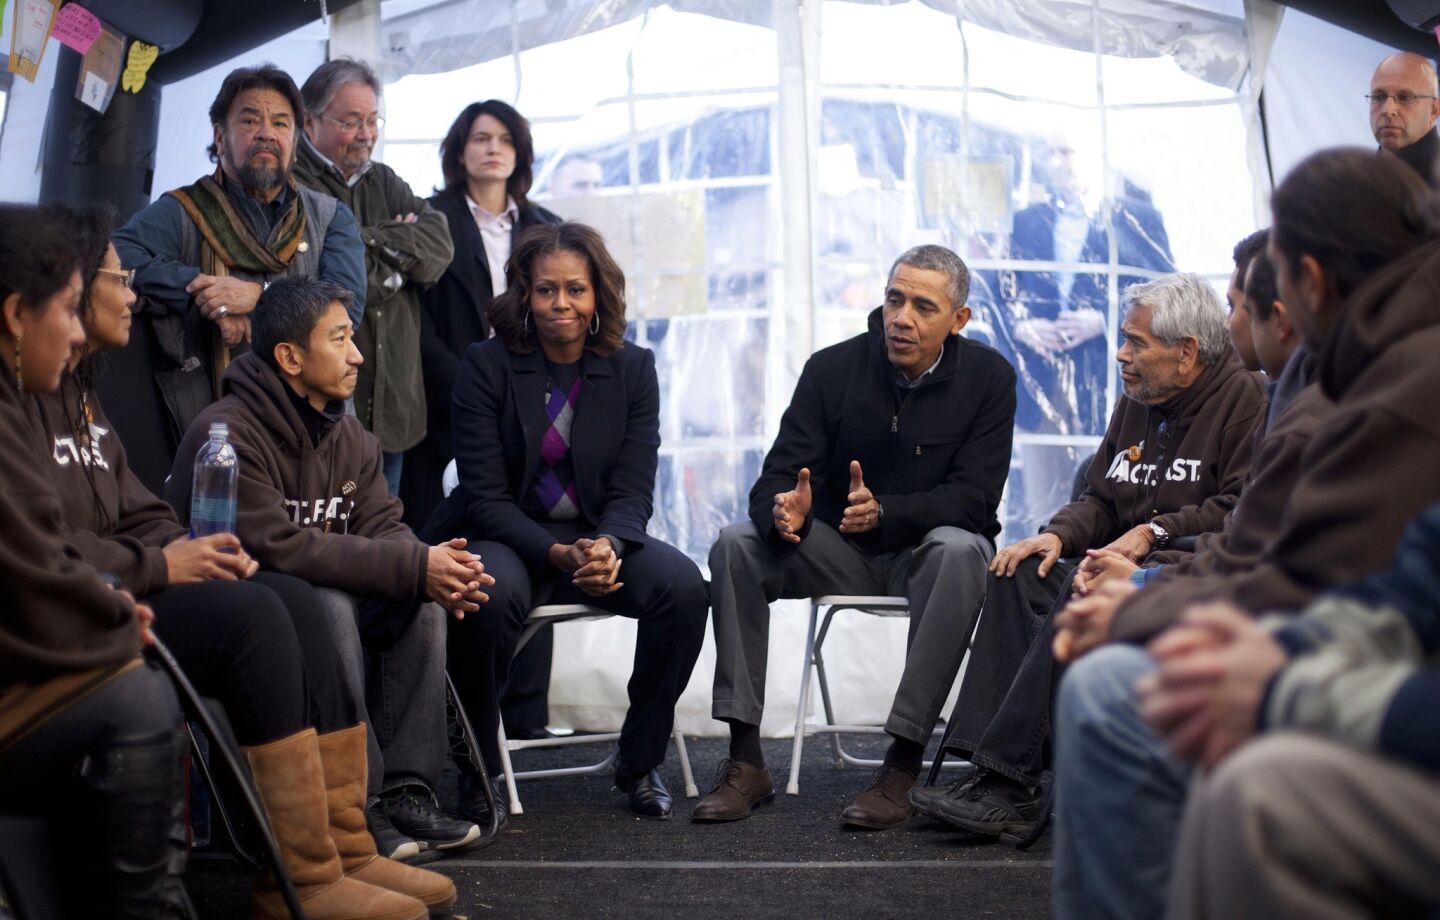 President Obama and First Lady Michelle Obama visit with individuals taking part in Fast for Families on the National Mall in Washington, D.C.